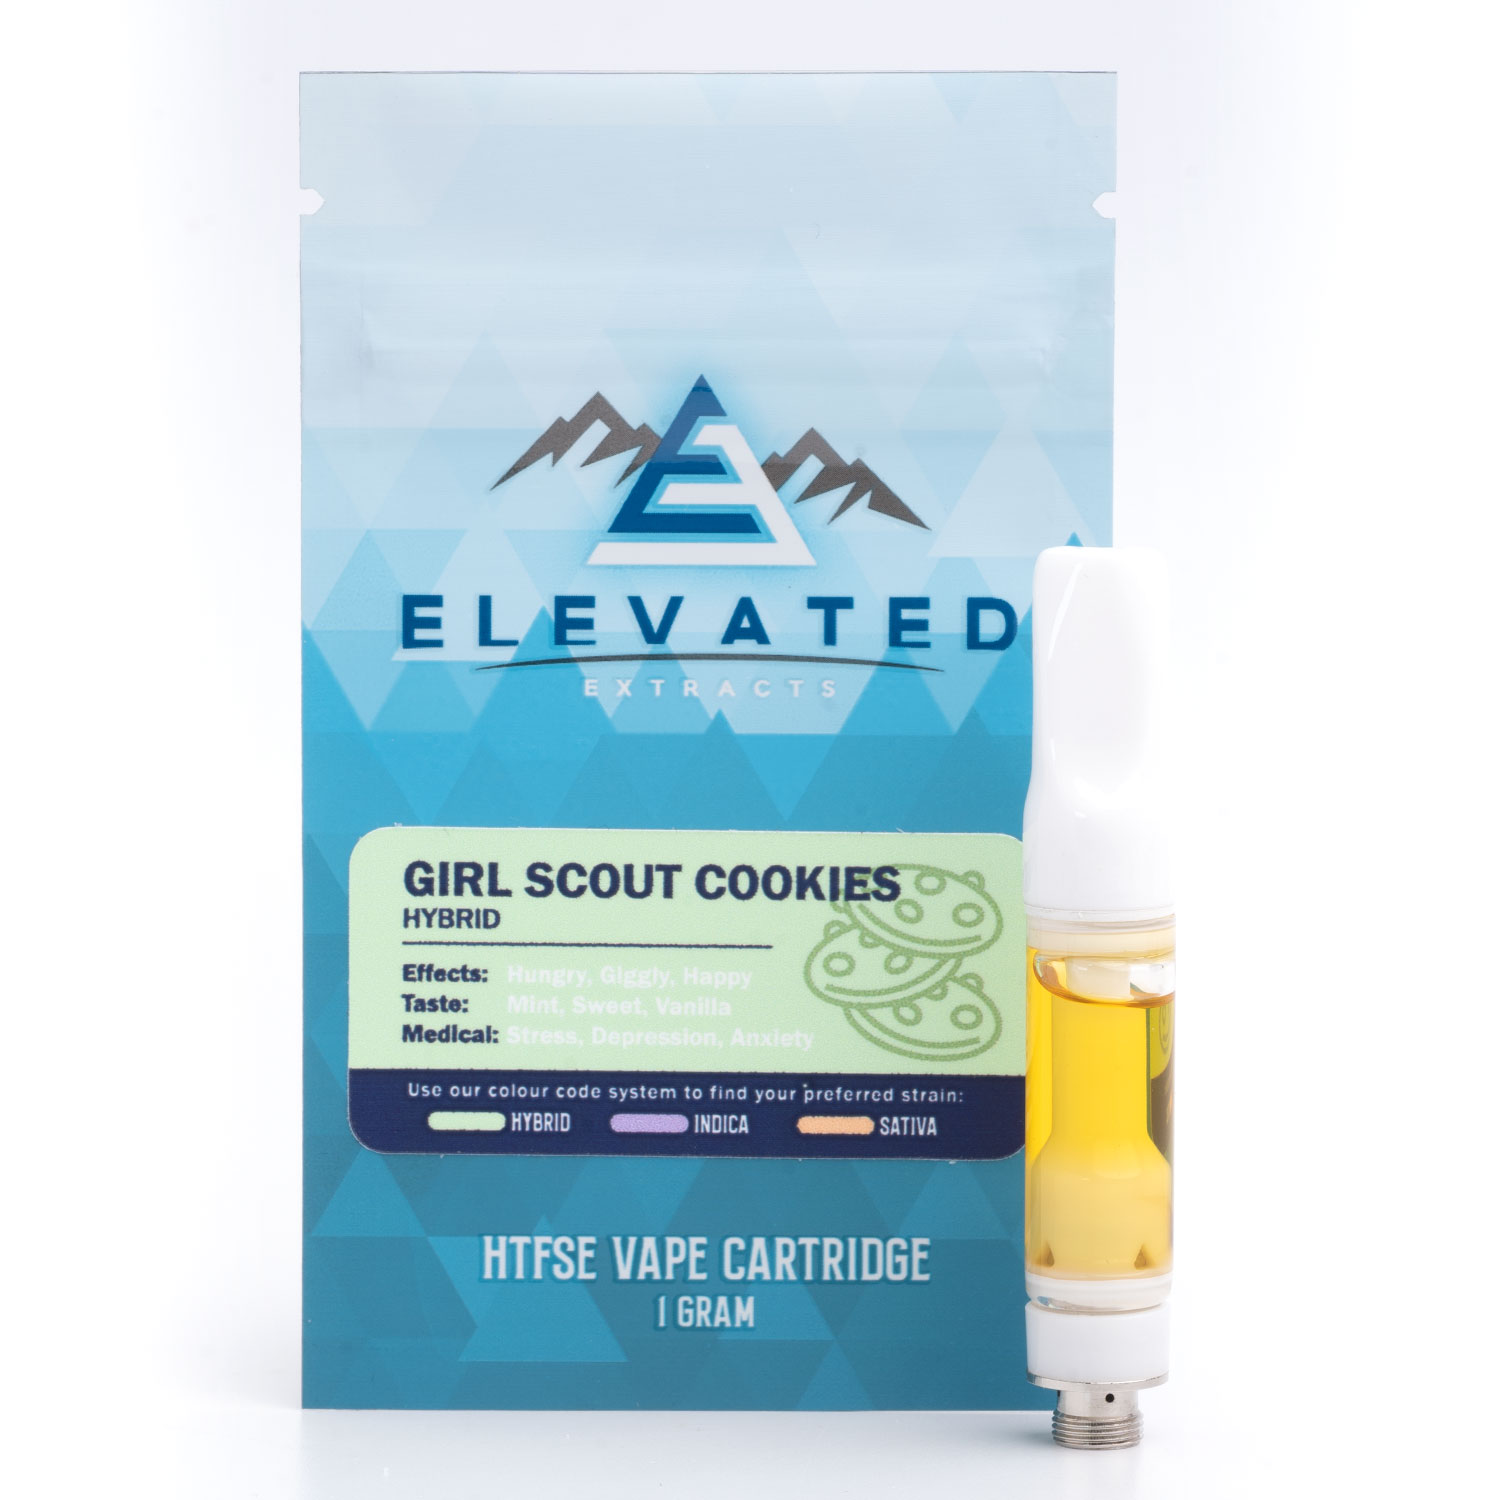 Elevated Extracts 1g Vape Cartridges